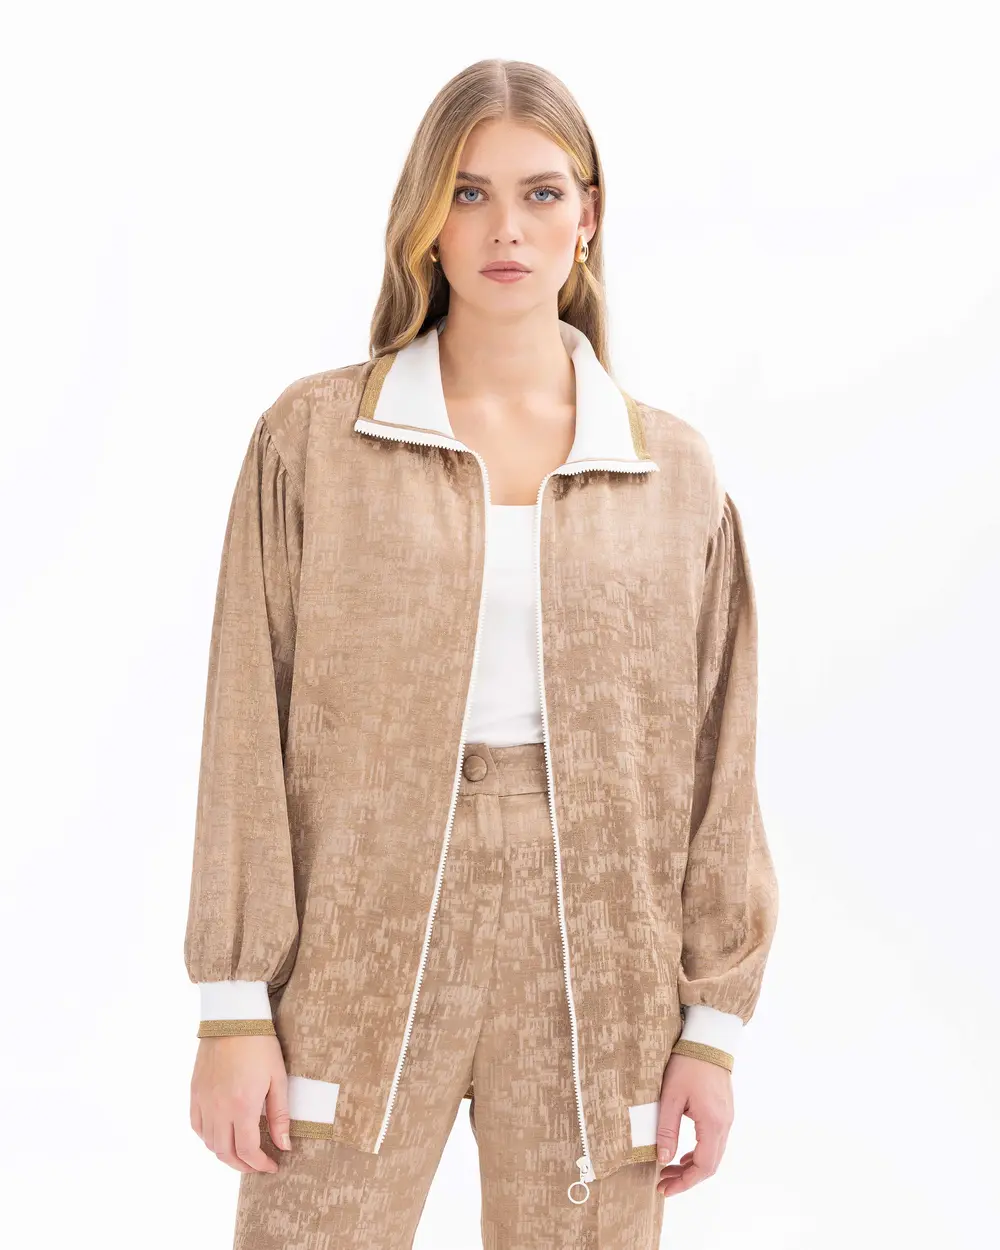 Woven Fabric Bomber Jacket with Patterned Zipper Detail